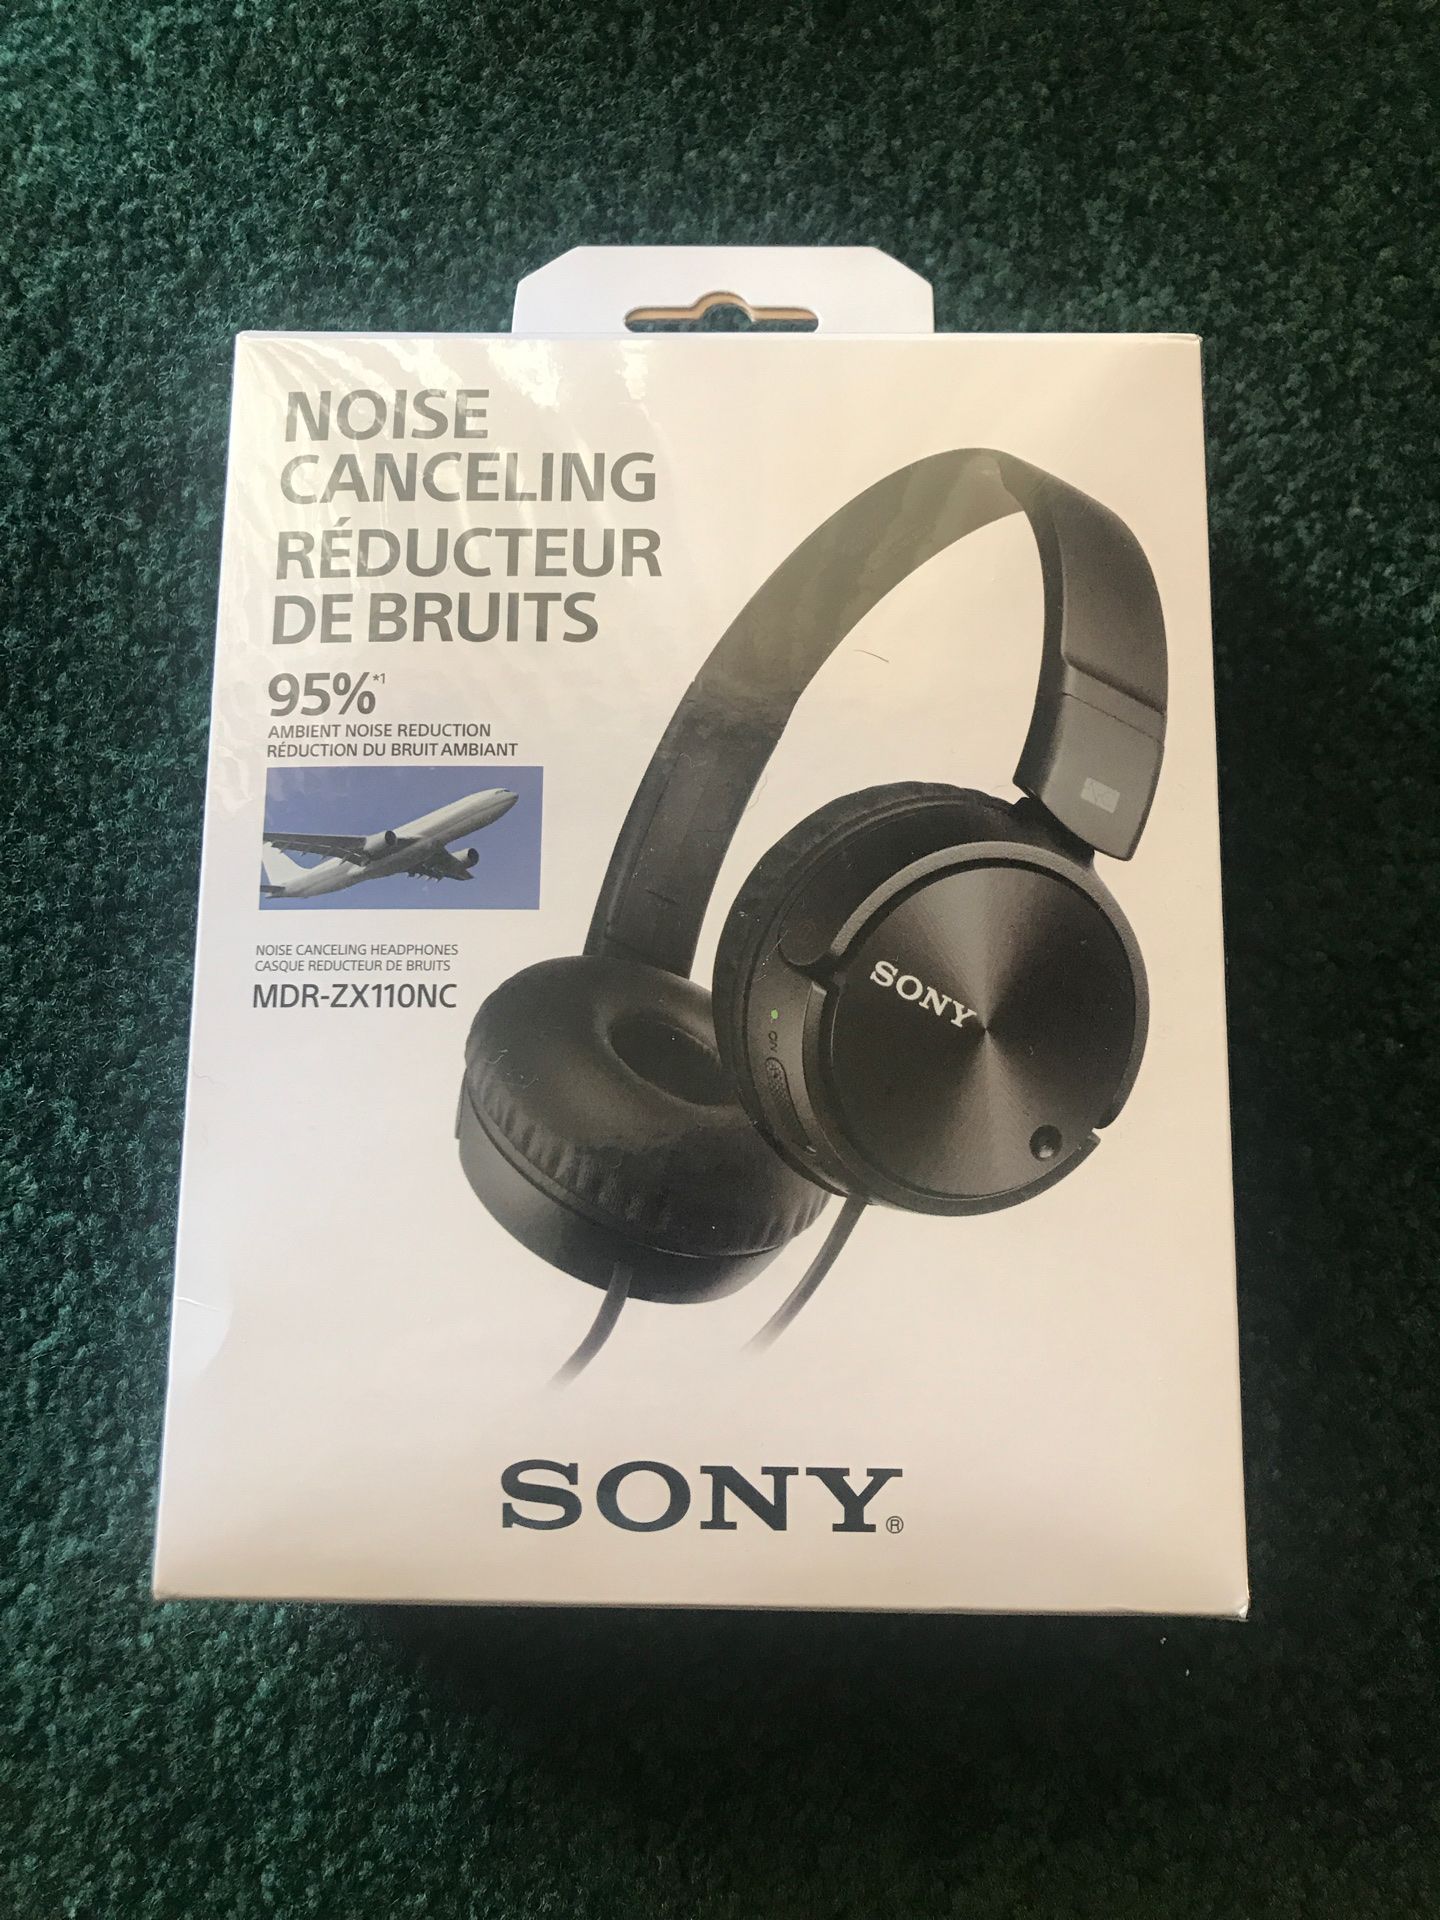 Sony Noise Cancelling Headphones MDR-ZX110NC